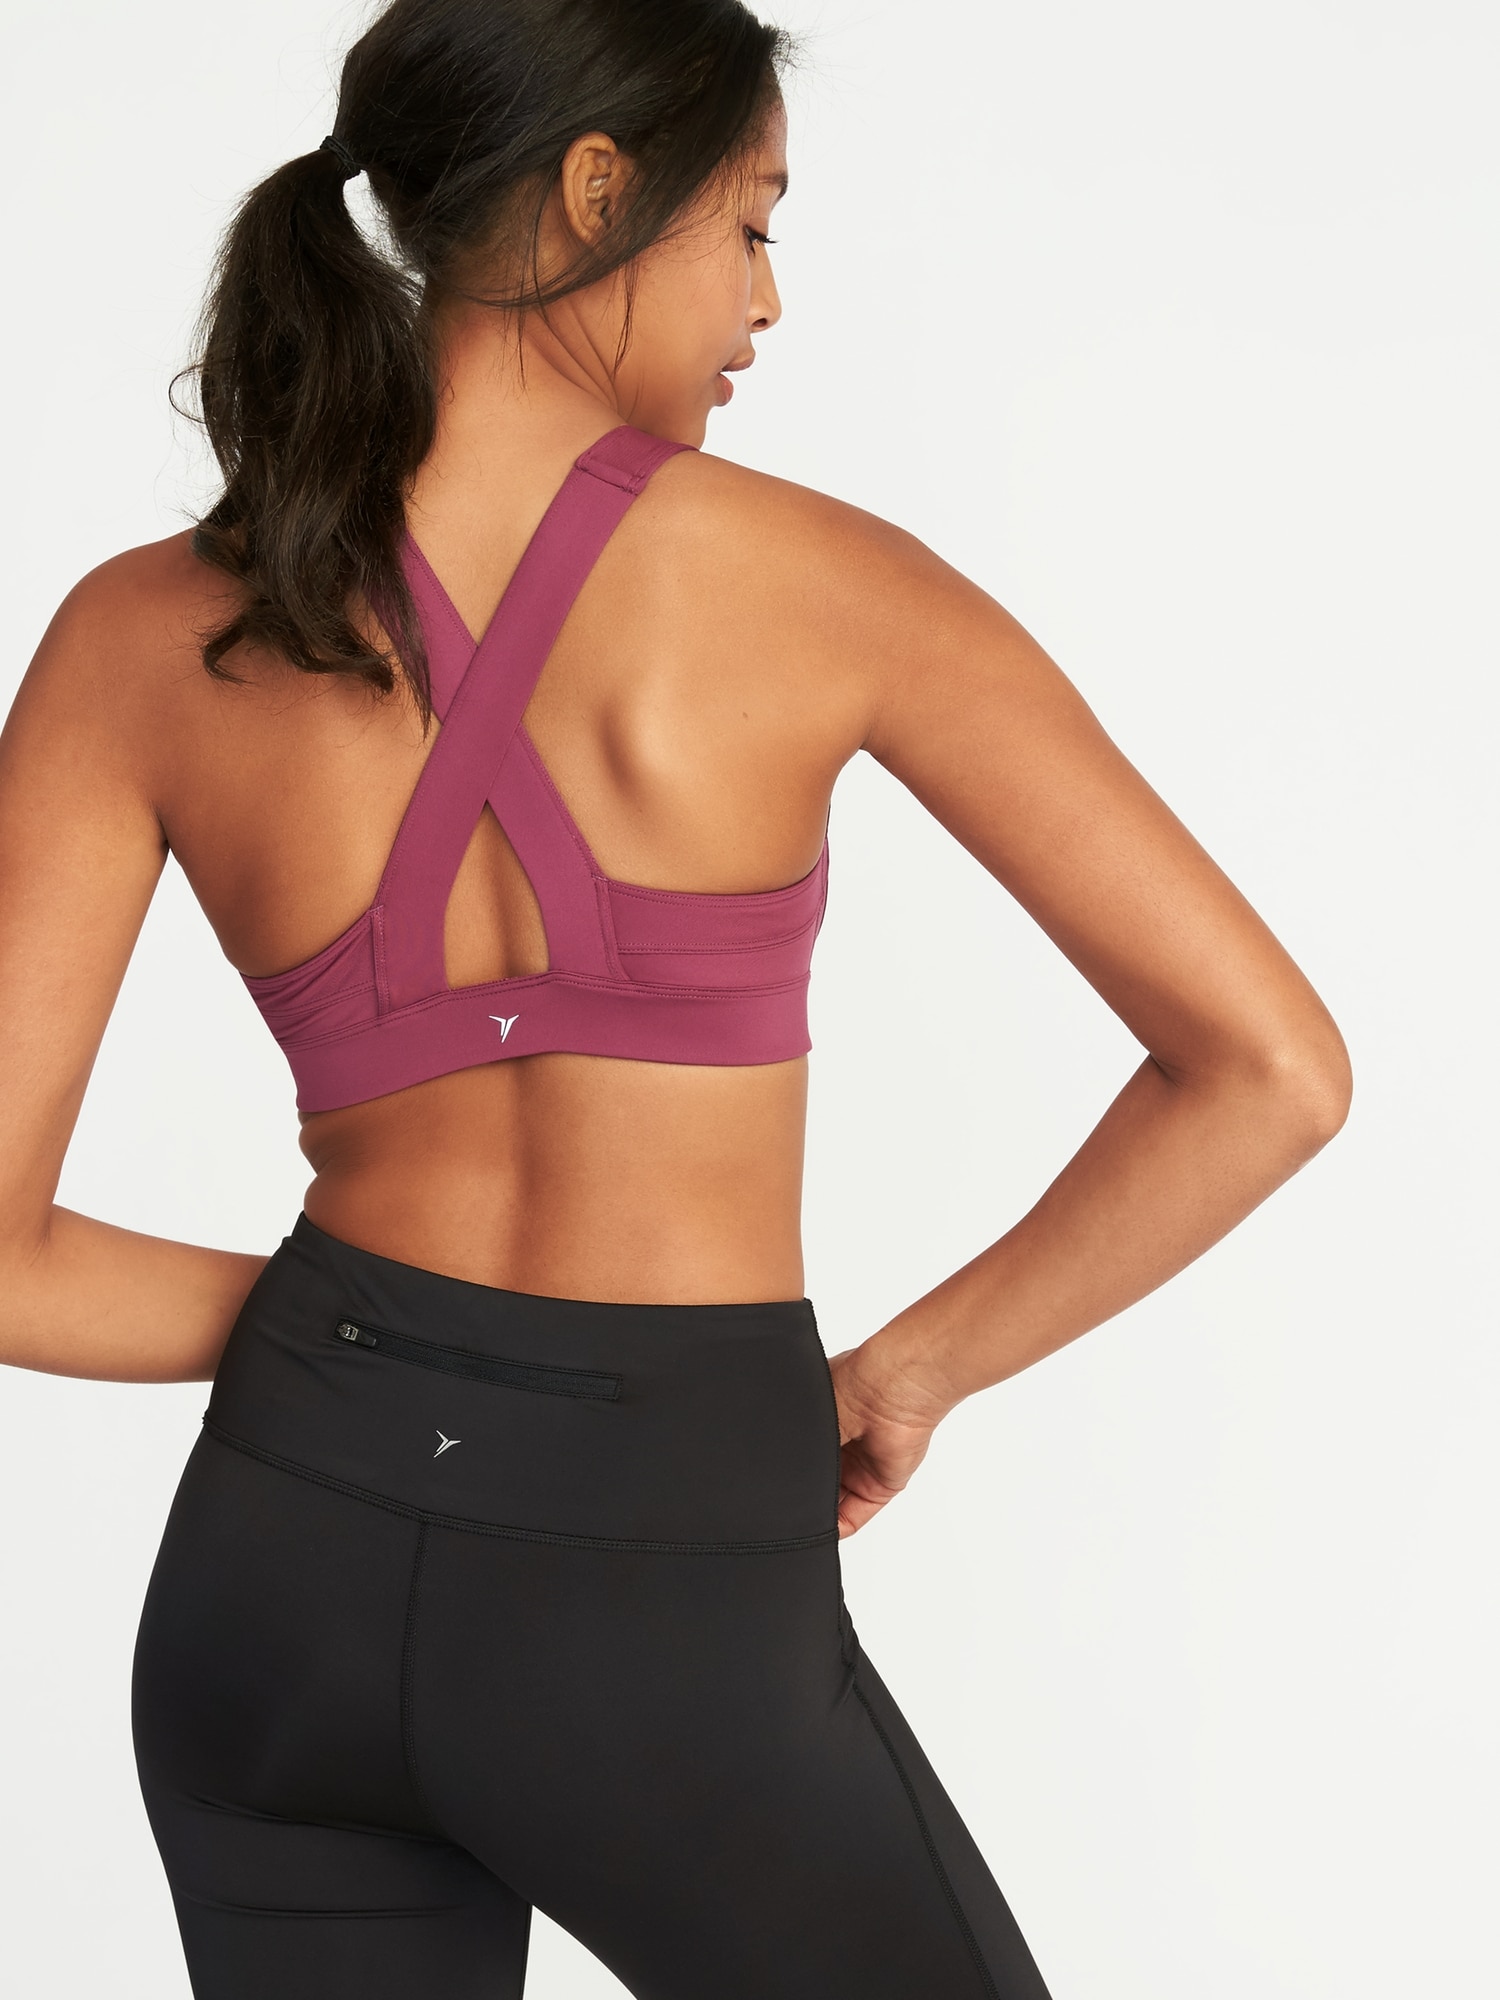 High Support Cross-Back Sports Bra for Women XS-XXL, Old Navy